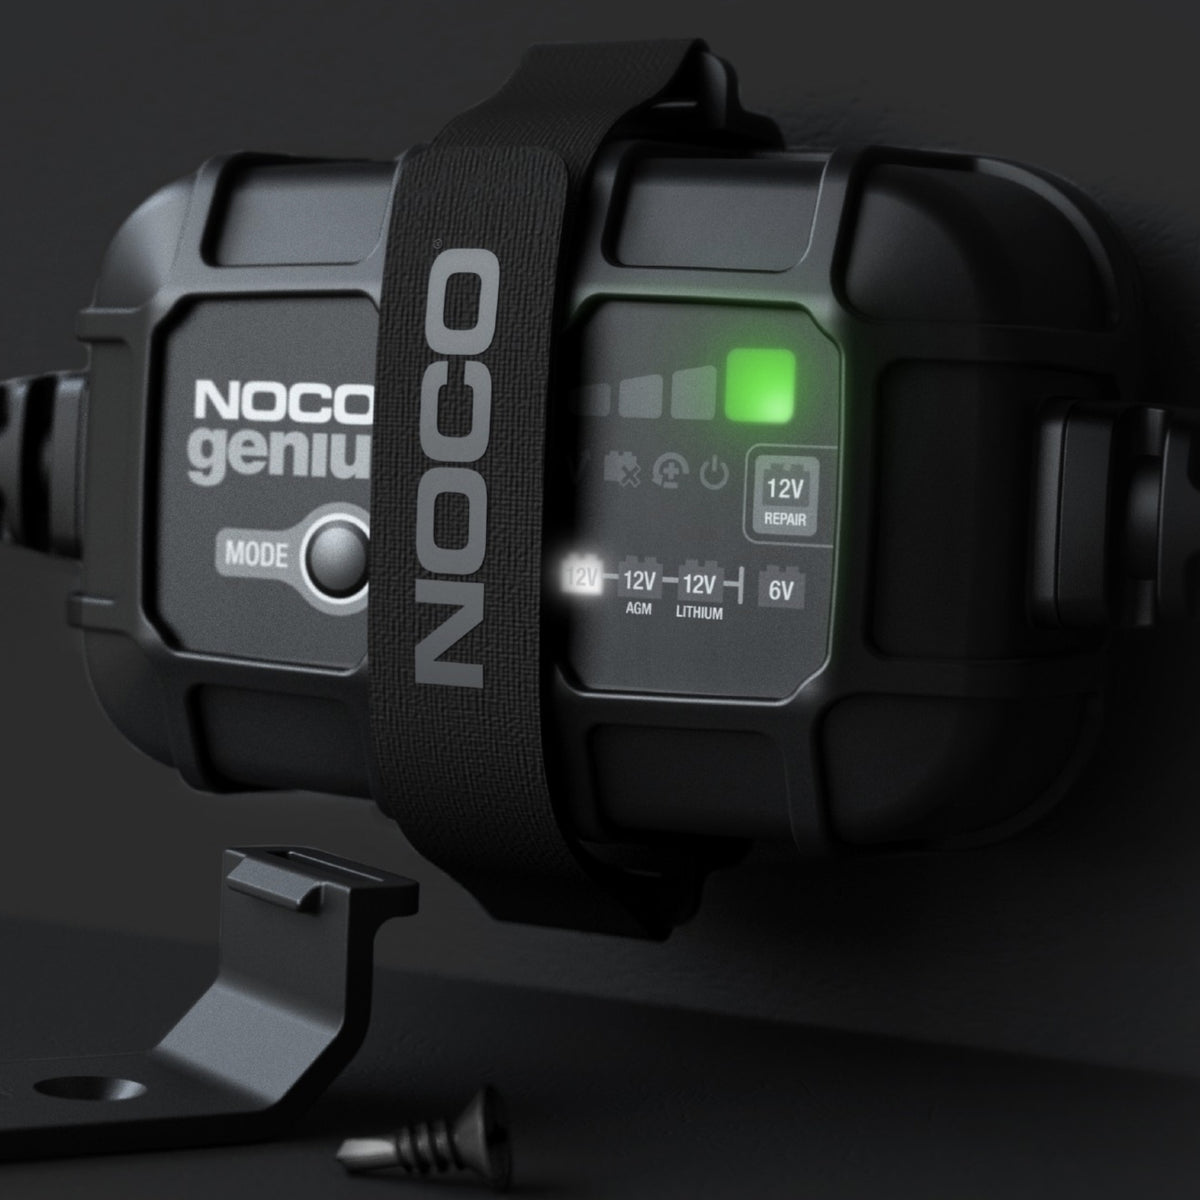 NOCO - GENIUS 2 BATTERY CHARGER